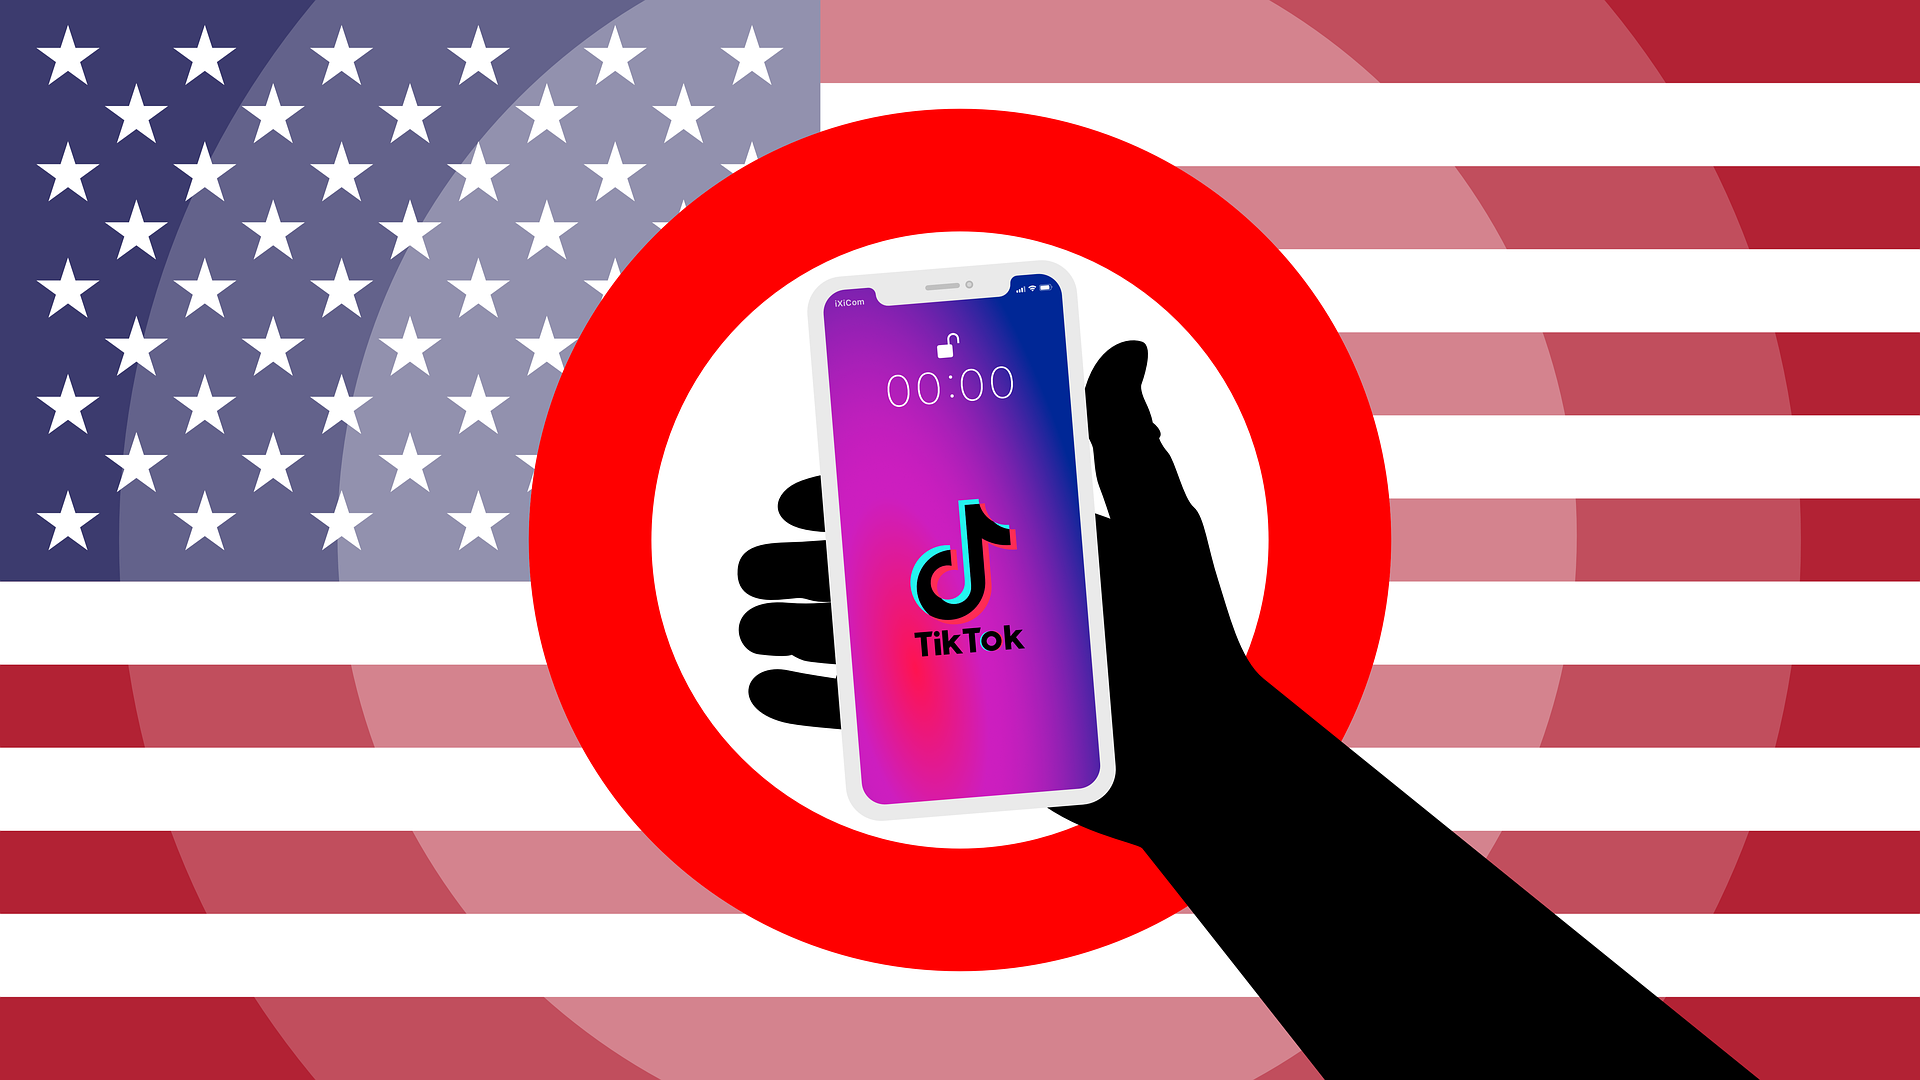 TikTok CEO to Appear Before Congress in March